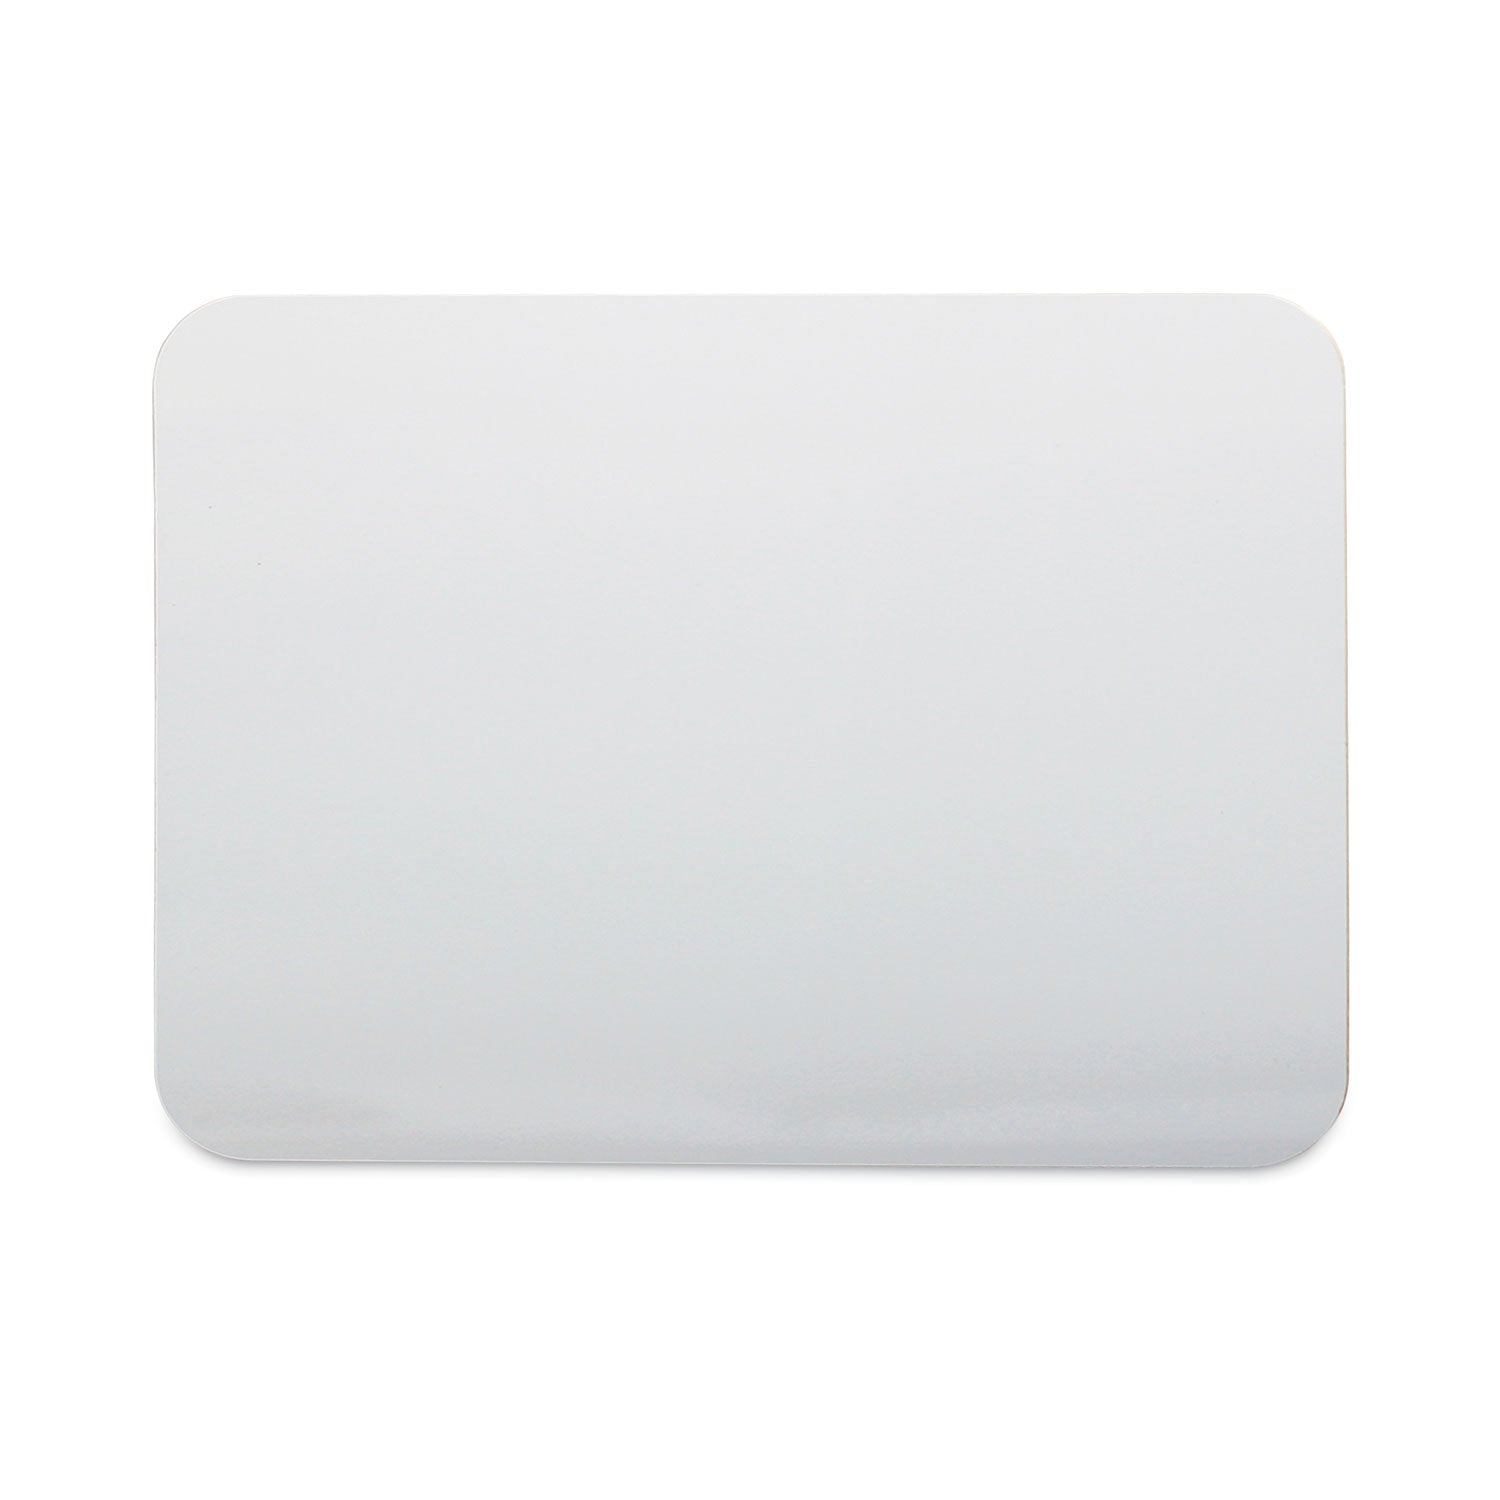 two-sided-dry-erase-board-7-x-5-white-front-back-surface-24-pack_flp45656 - 1